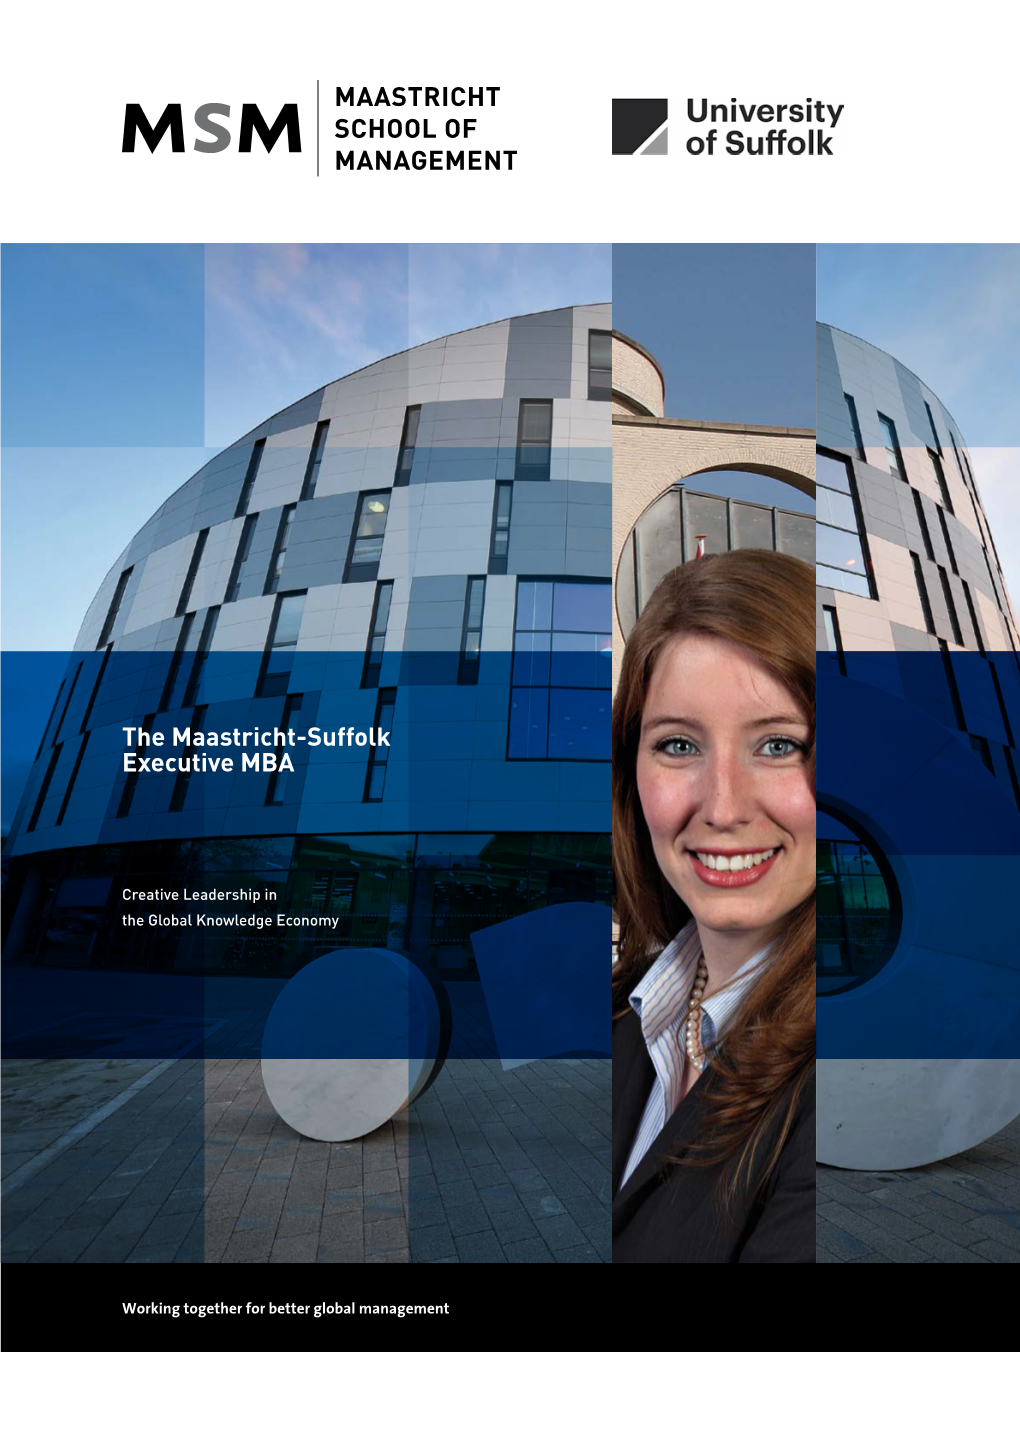 The Maastricht-Suffolk Executive MBA